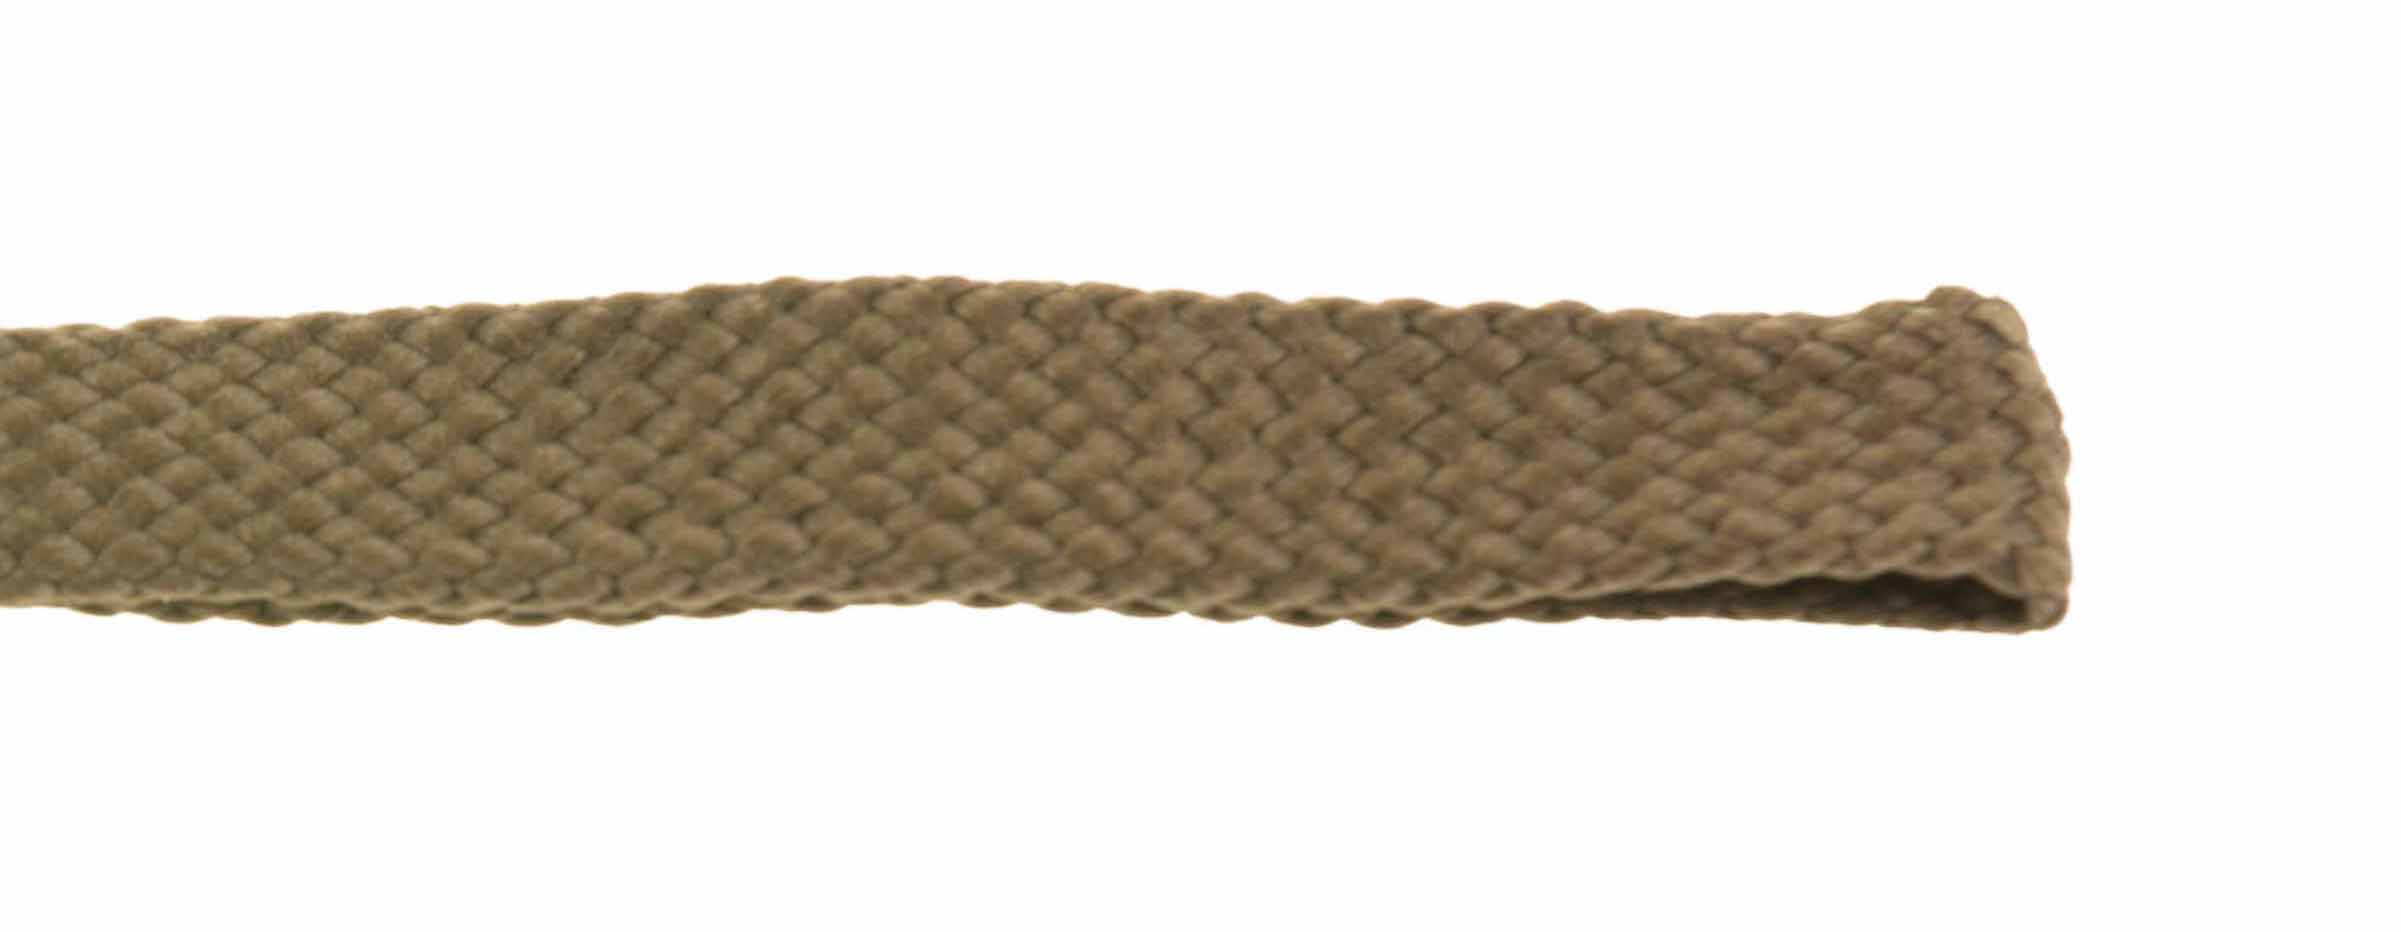 Bore Cleaner Cord Cal. 17 - 4,5mm